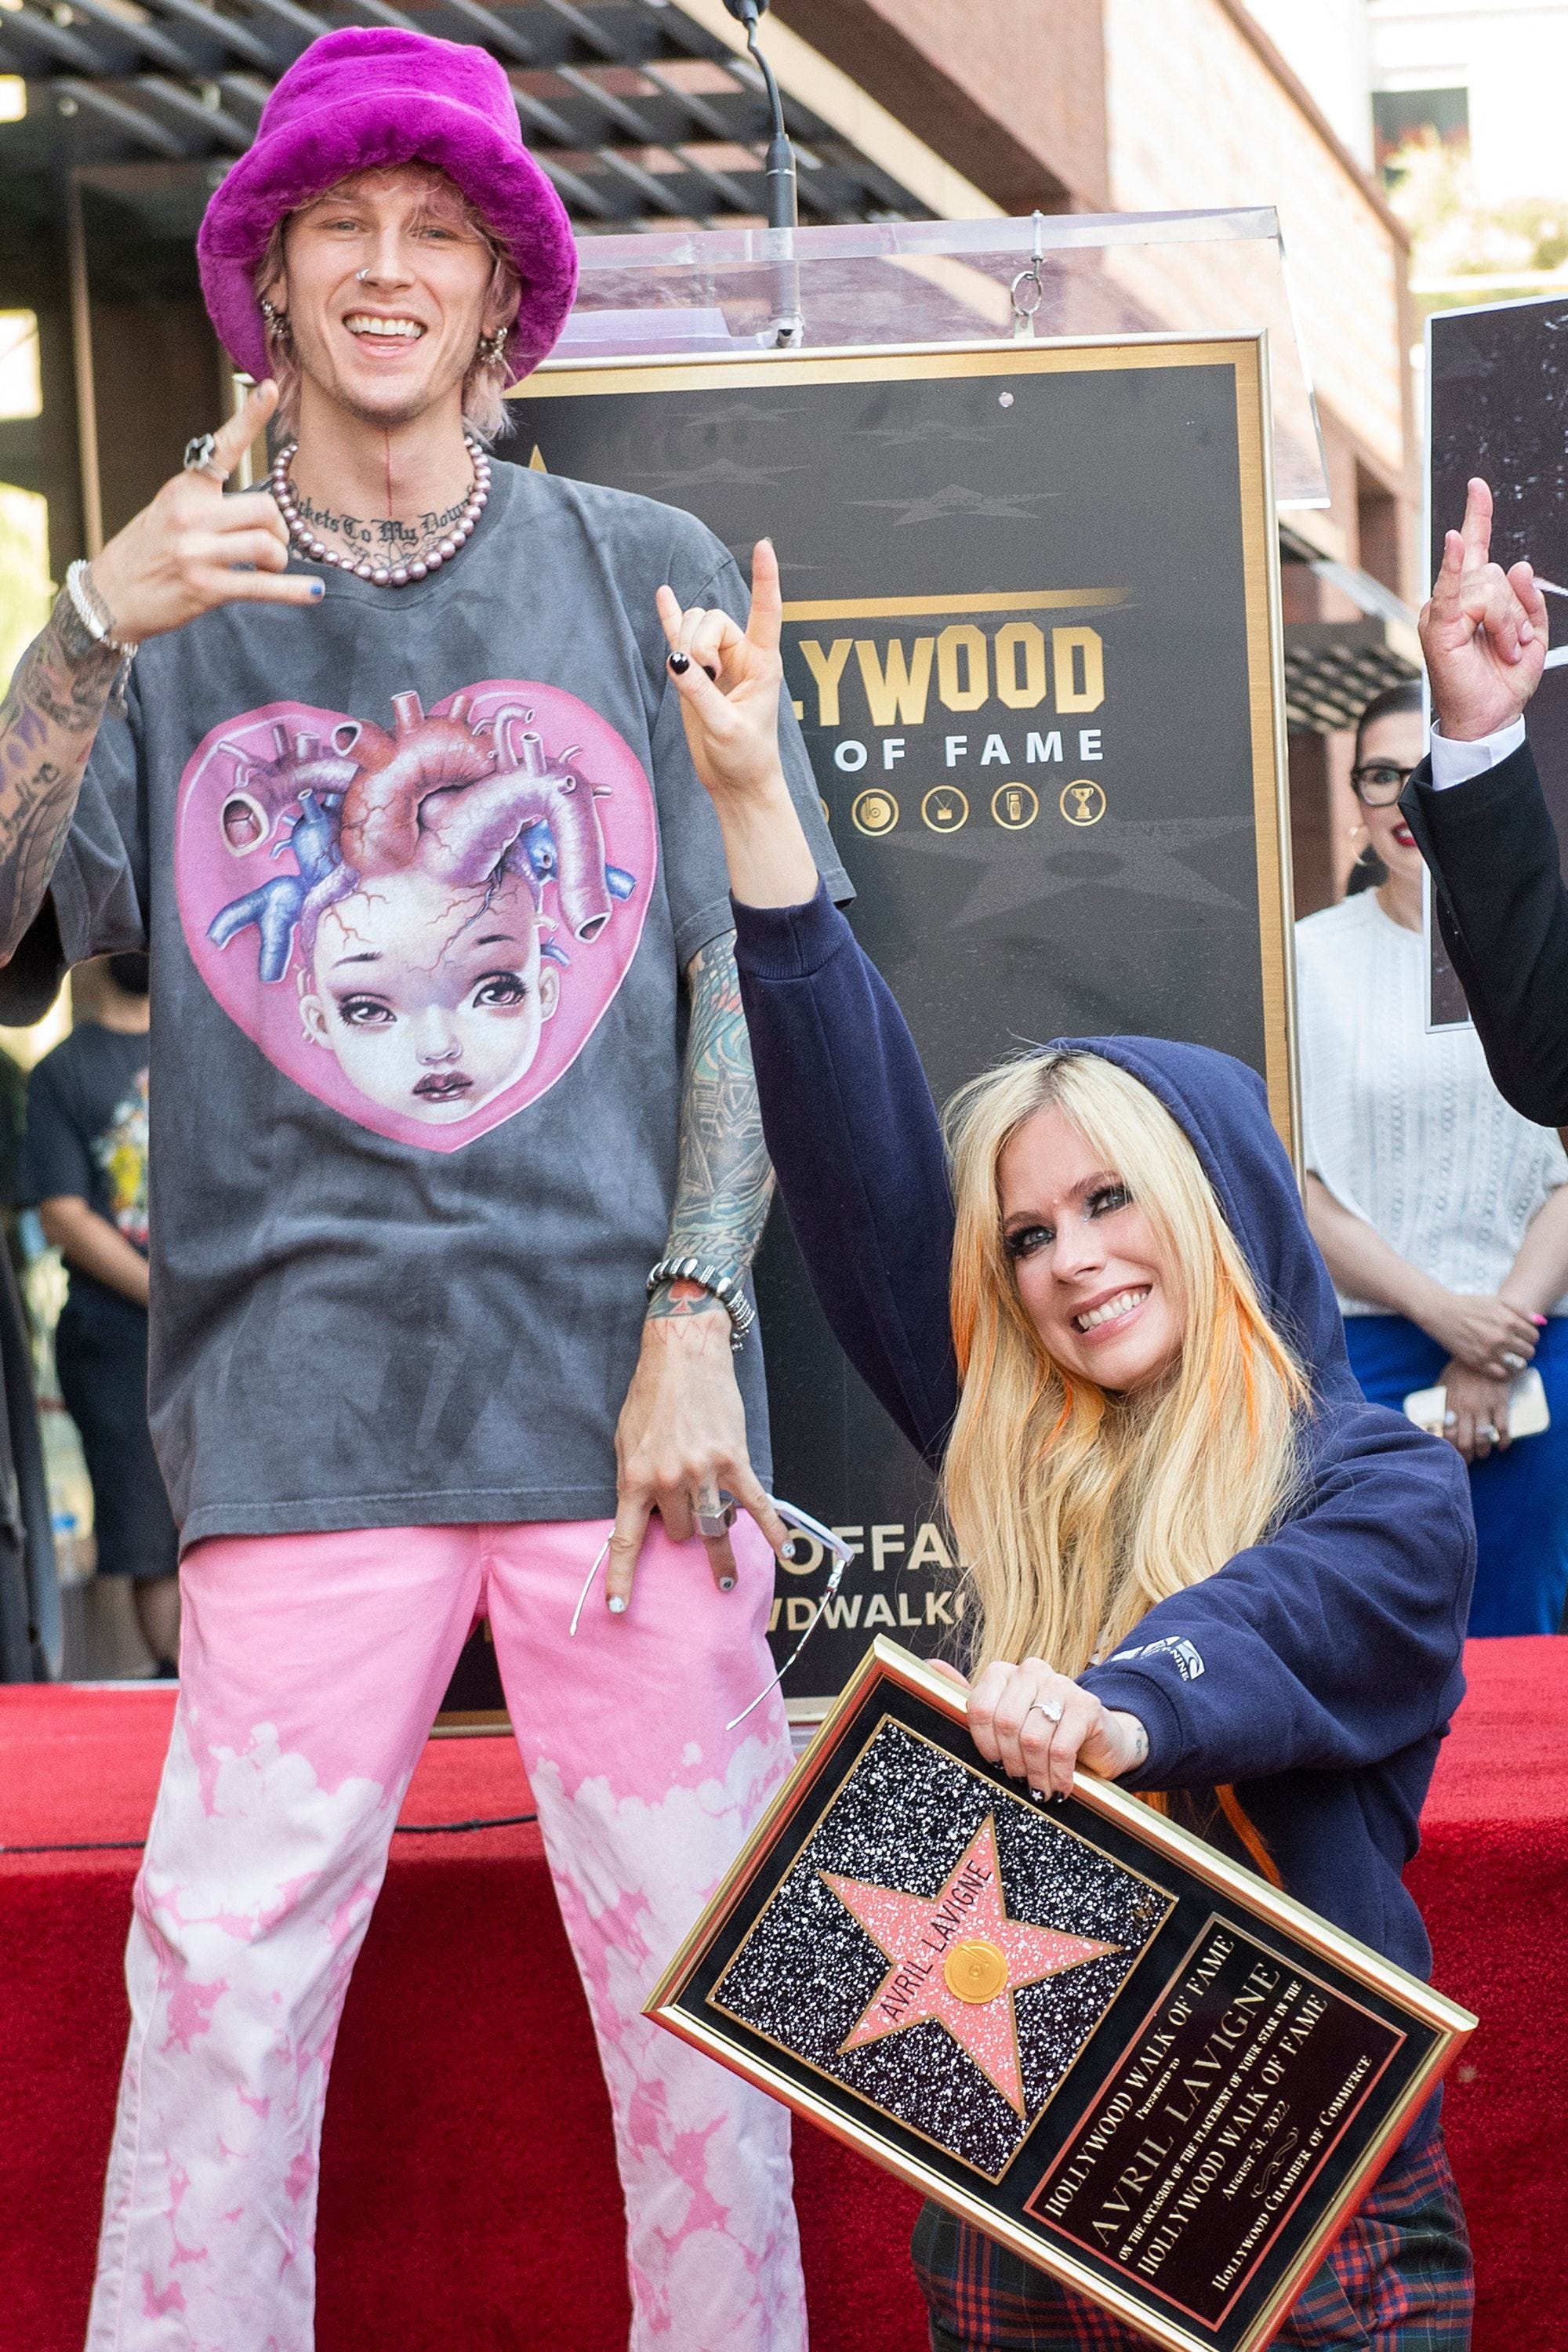 Rapper <a href="https://www.usatoday.com/story/entertainment/celebrities/2022/06/27/machine-gun-kelly-discusses-mental-health-suicide-attempt-hulu-doc/7750579001/">Machine Gun Kelly</a>, left, was there to support Lavigne and pose for photos. The two recently collaborated on the song "Bois Lie" from Lavigne's album <a href="https://www.usatoday.com/story/entertainment/music/2022/02/24/avril-lavigne-interview-machine-gun-kelly-travis-barker-love-sux-album/6832716001/">"Love Sux."</a><br> <br> "I can remember seeing these legendary names, and I never could have imagined mine would be here," said Lavigne during the ceremony. "This is so crazy. I am so grateful. This is probably one of the coolest days of my life."